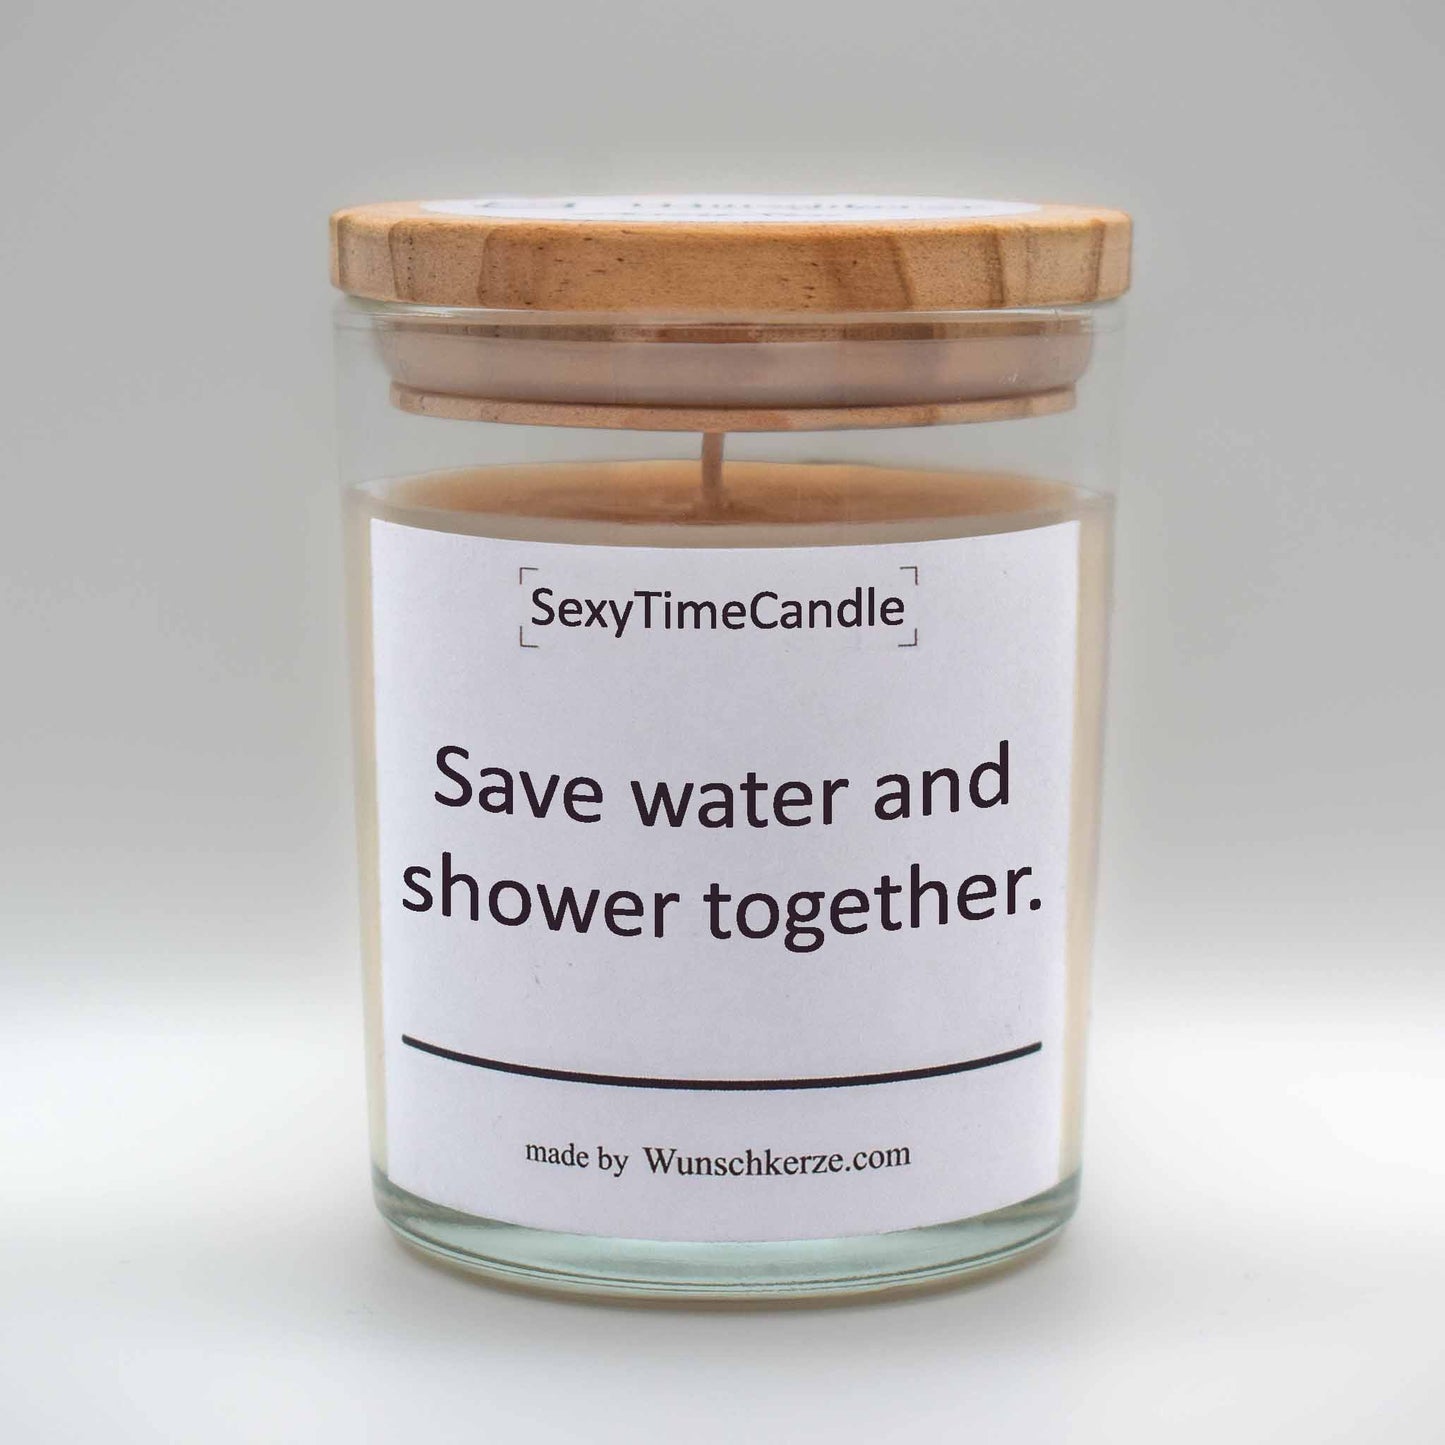 SexyTimeCandle - Save water and shower together.